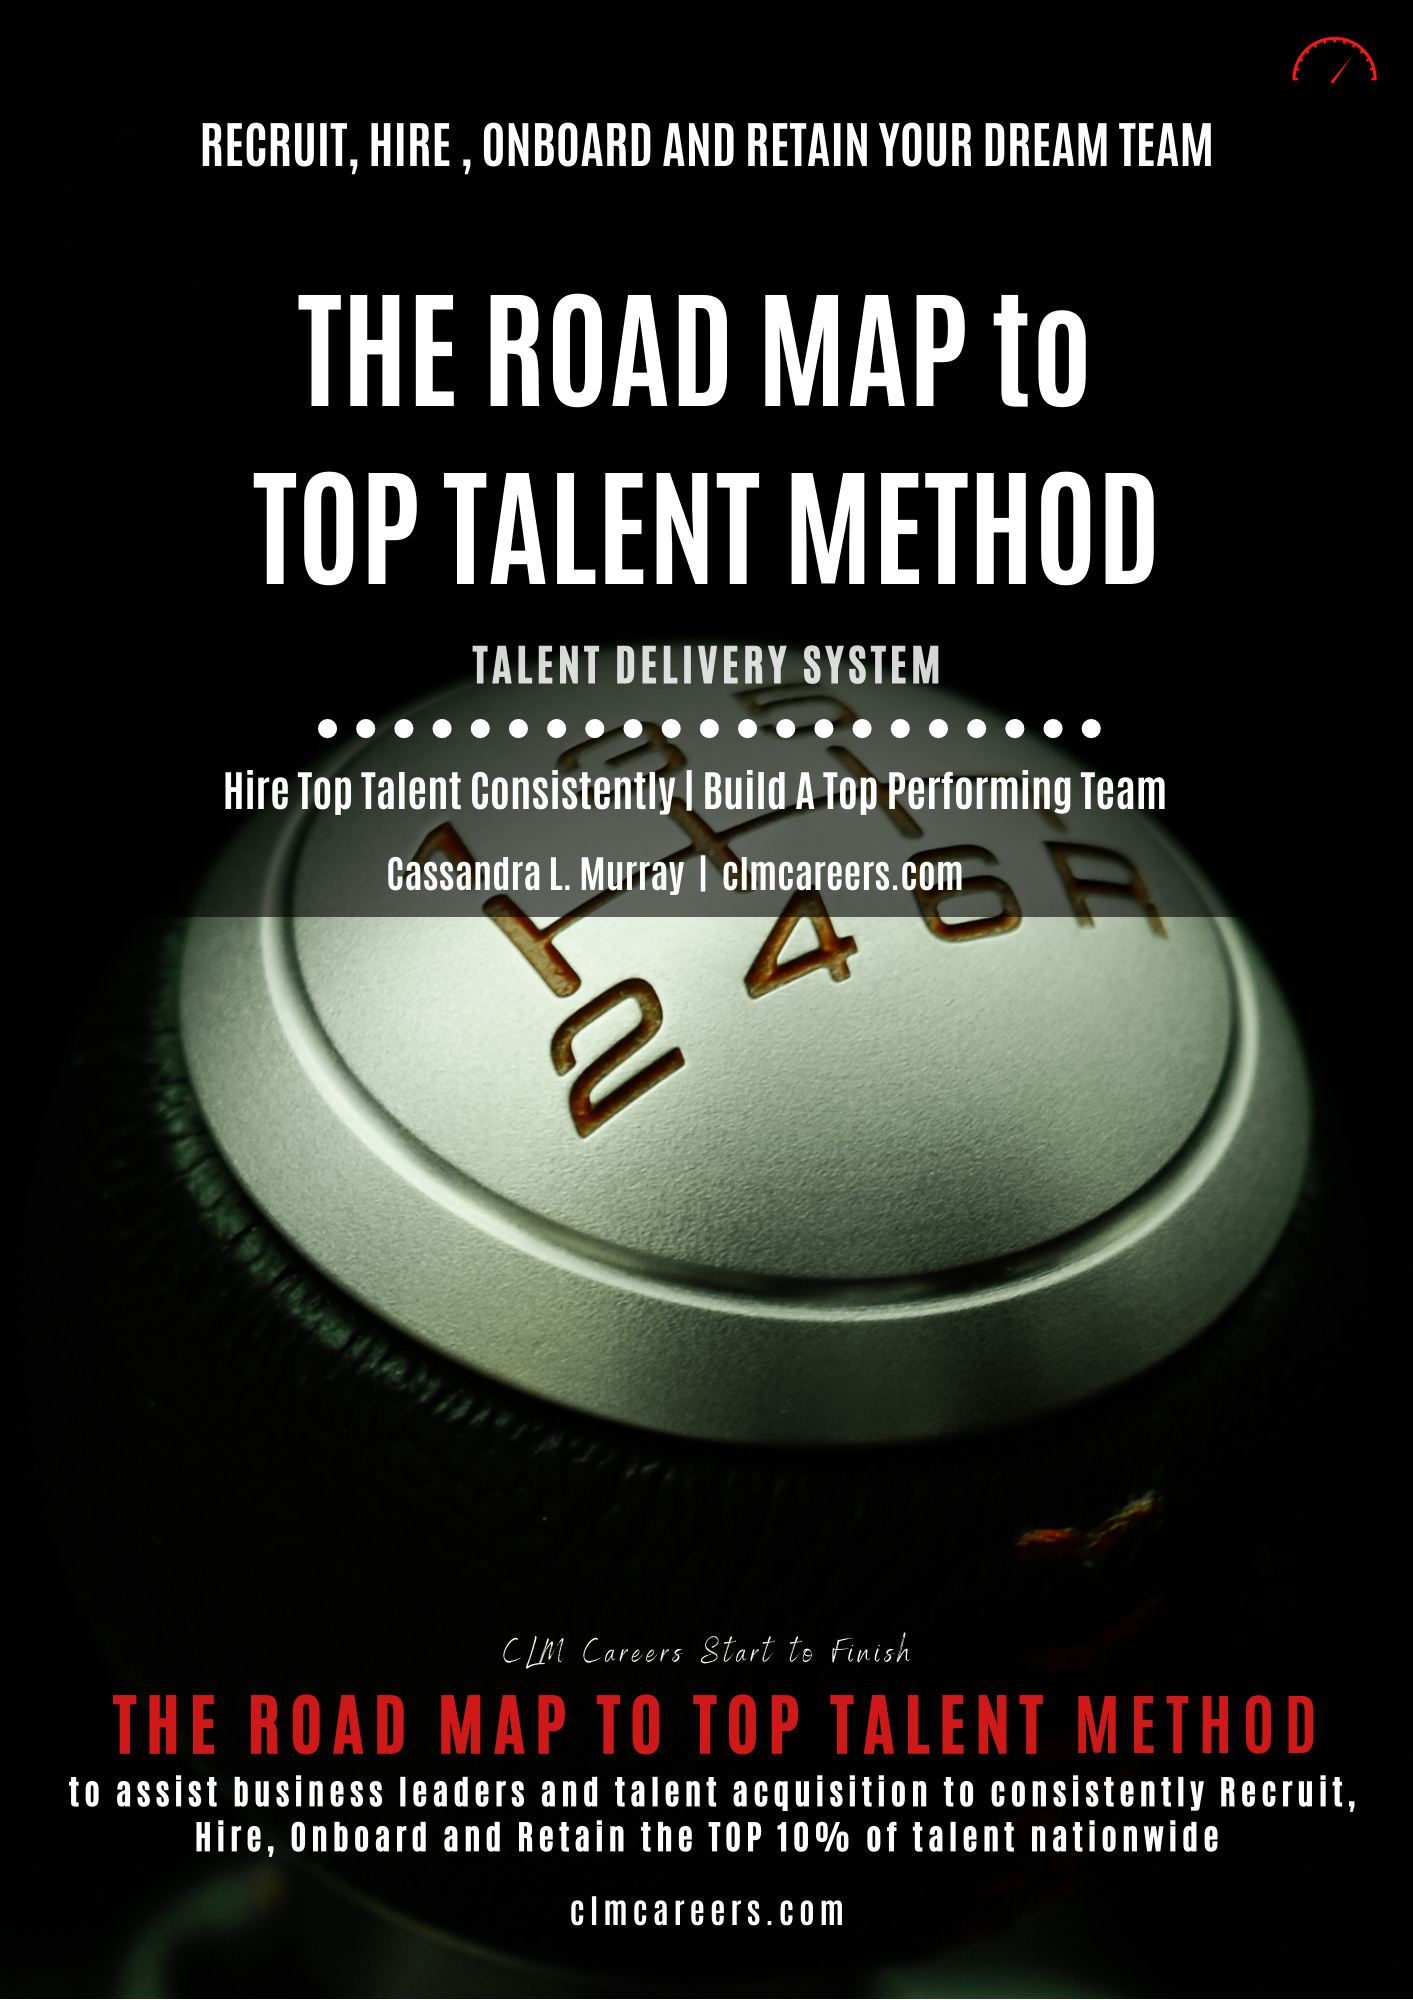 The Road Map to Top Talent Method